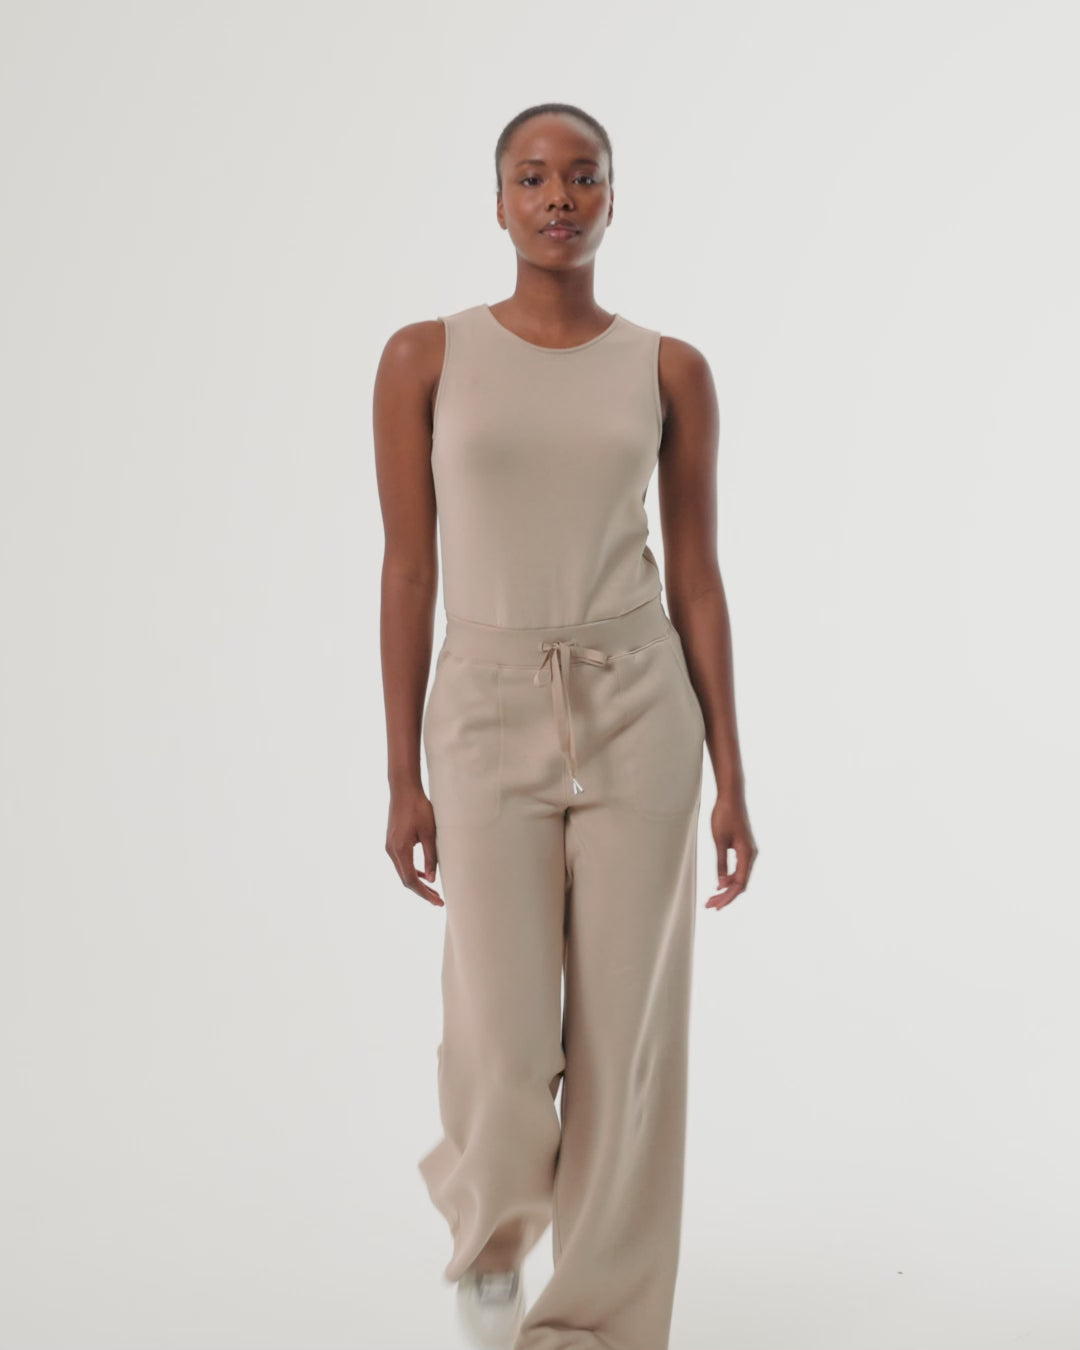 Shop Spanx Jumpsuit with great discounts and prices online - Dec